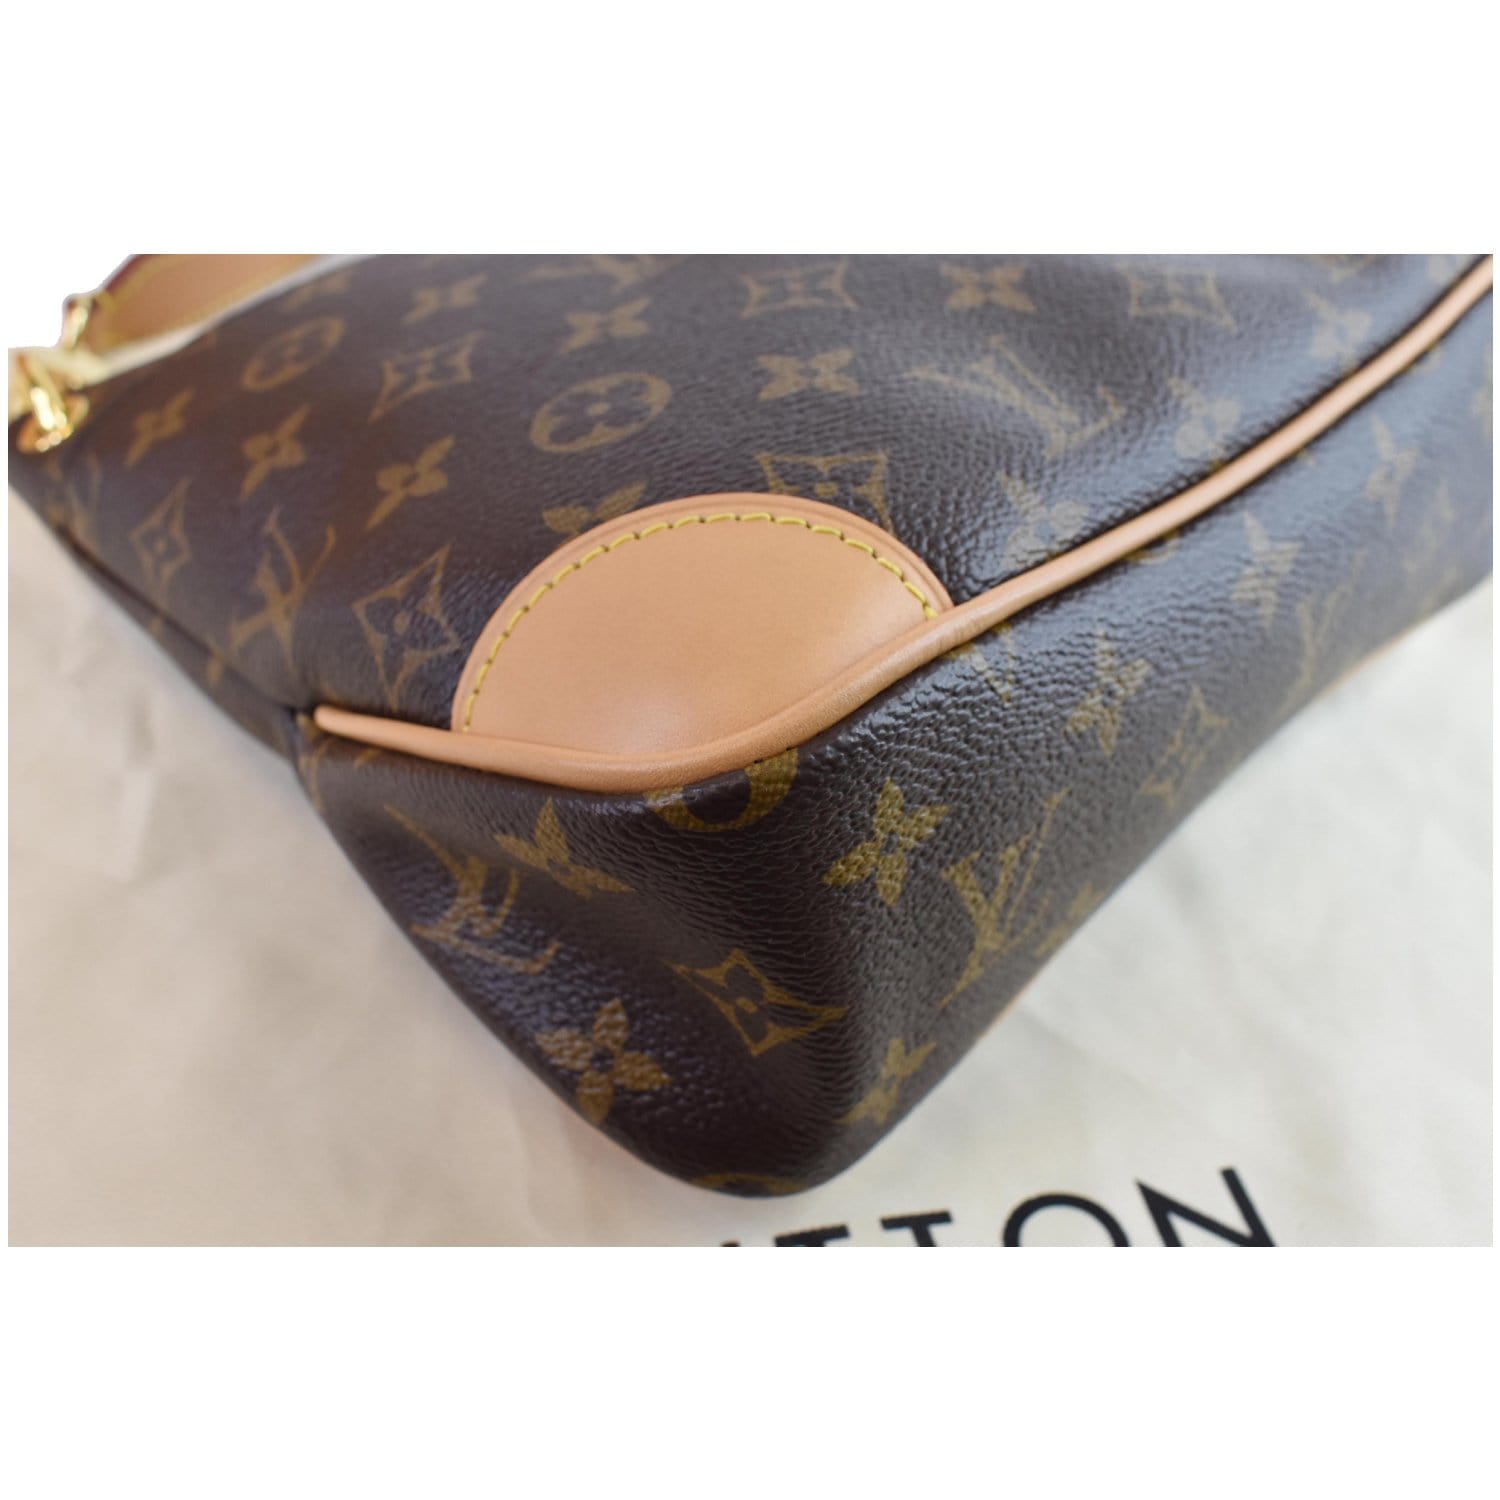 Louis Vuitton Neverfull Shopping Bag in Monogram Canvas and Natural